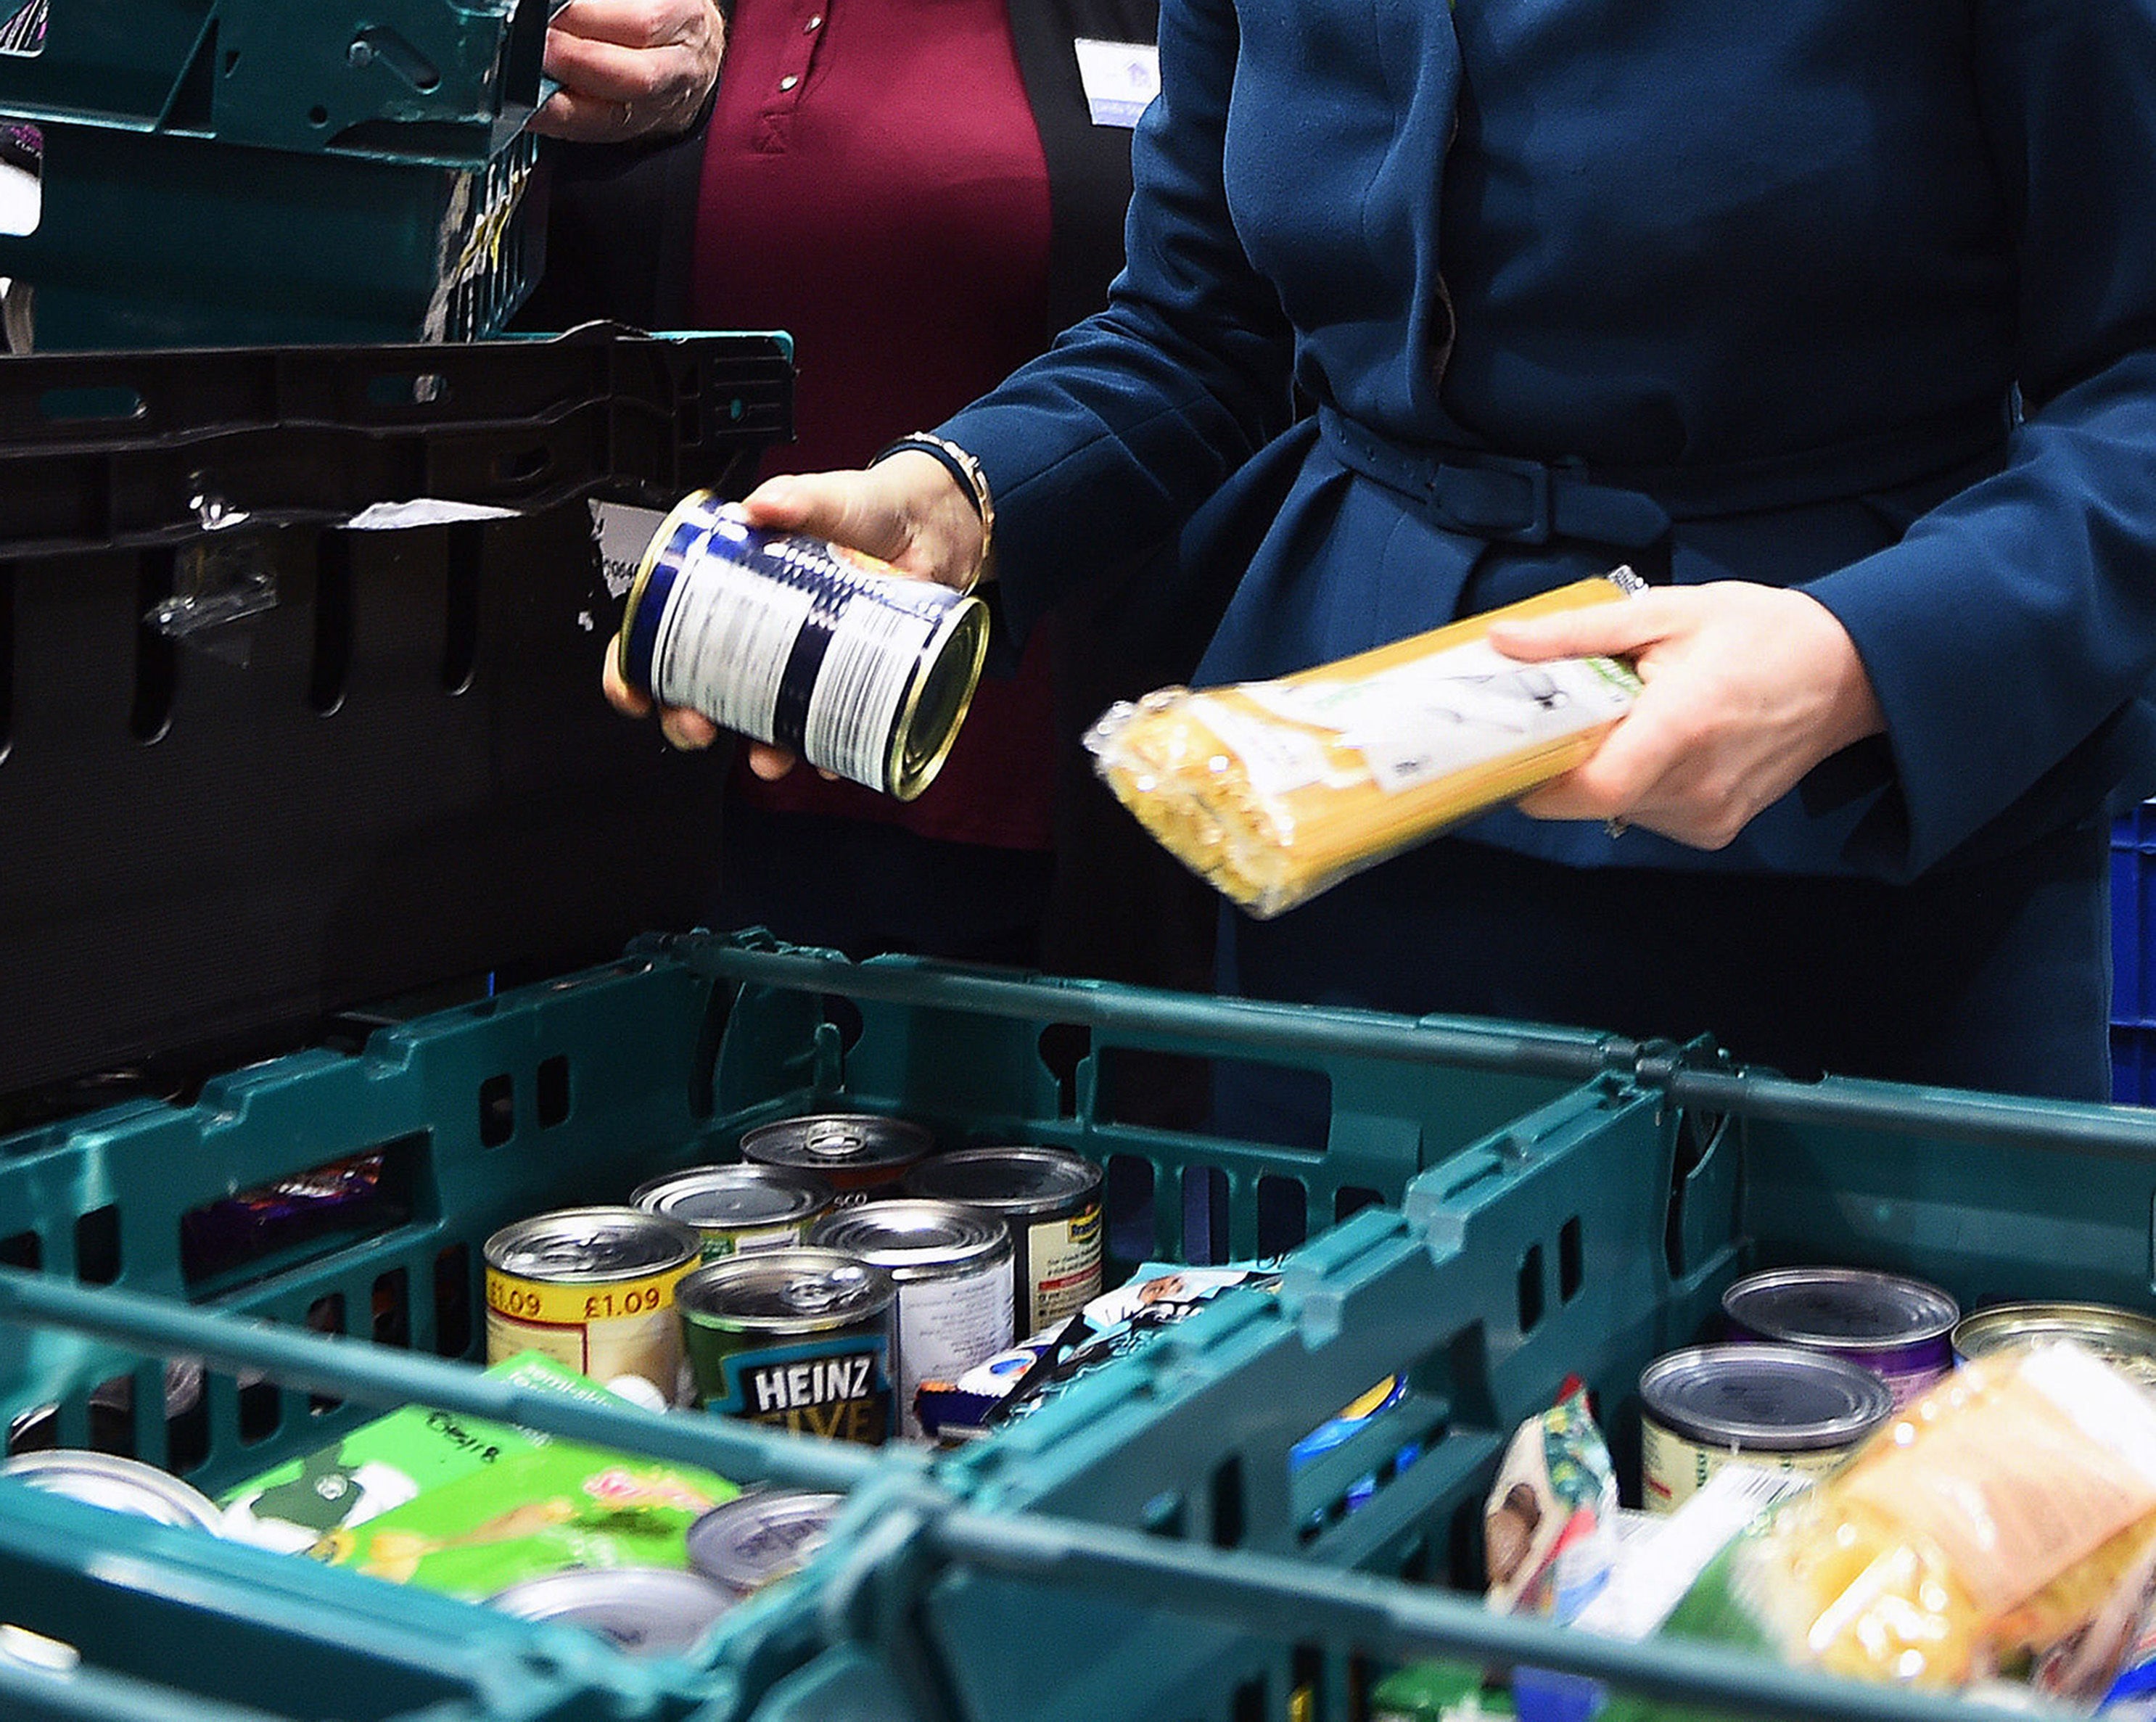 More Britons have had to turn to food banks due to rising prices